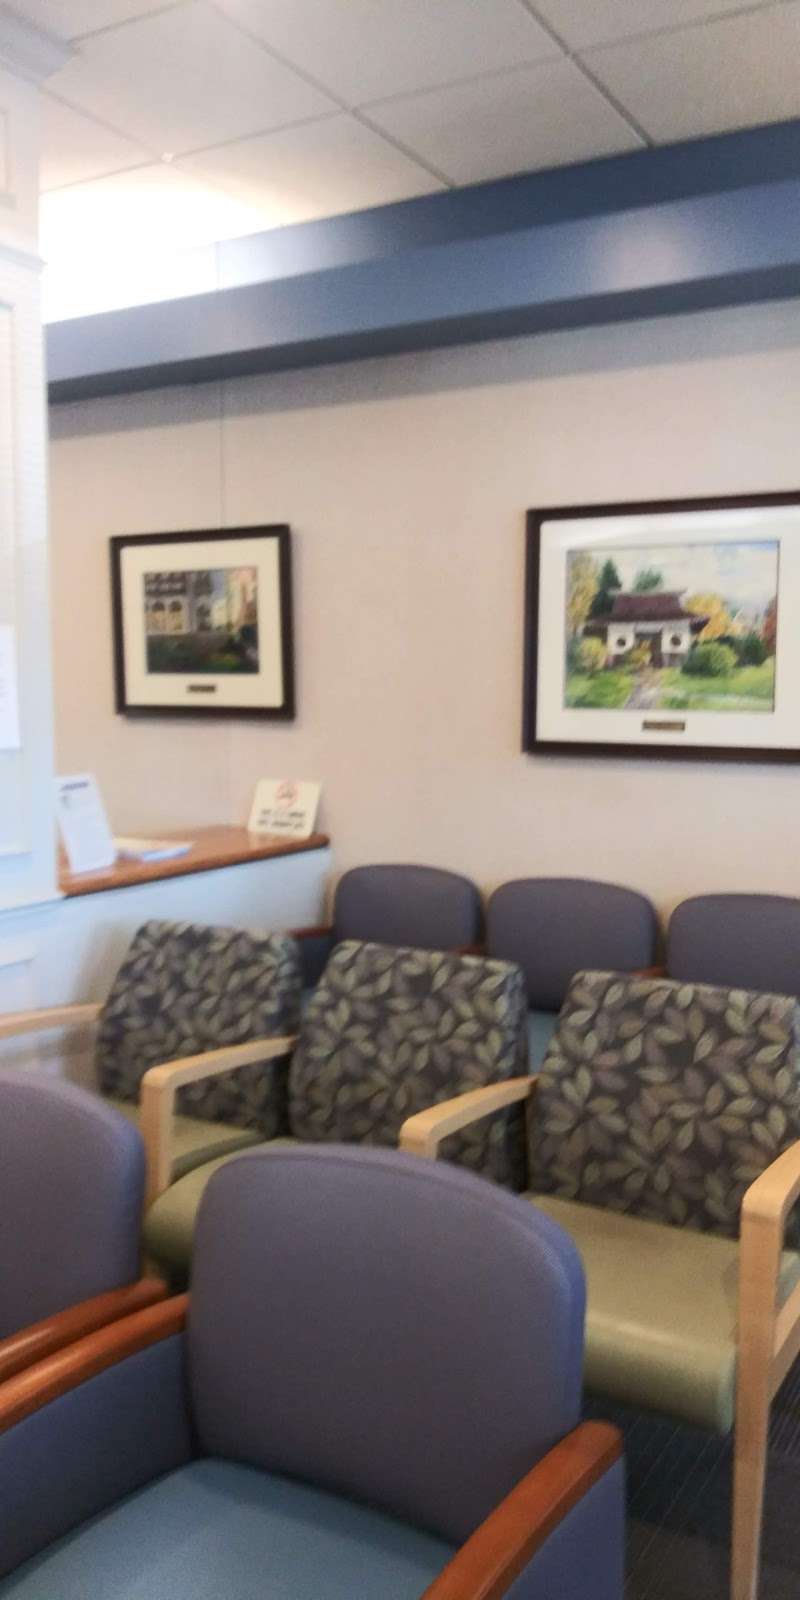 Valley ENT Sinus and Allergy | 190 Welles St, Kingston, PA 18704 | Phone: (570) 283-0524